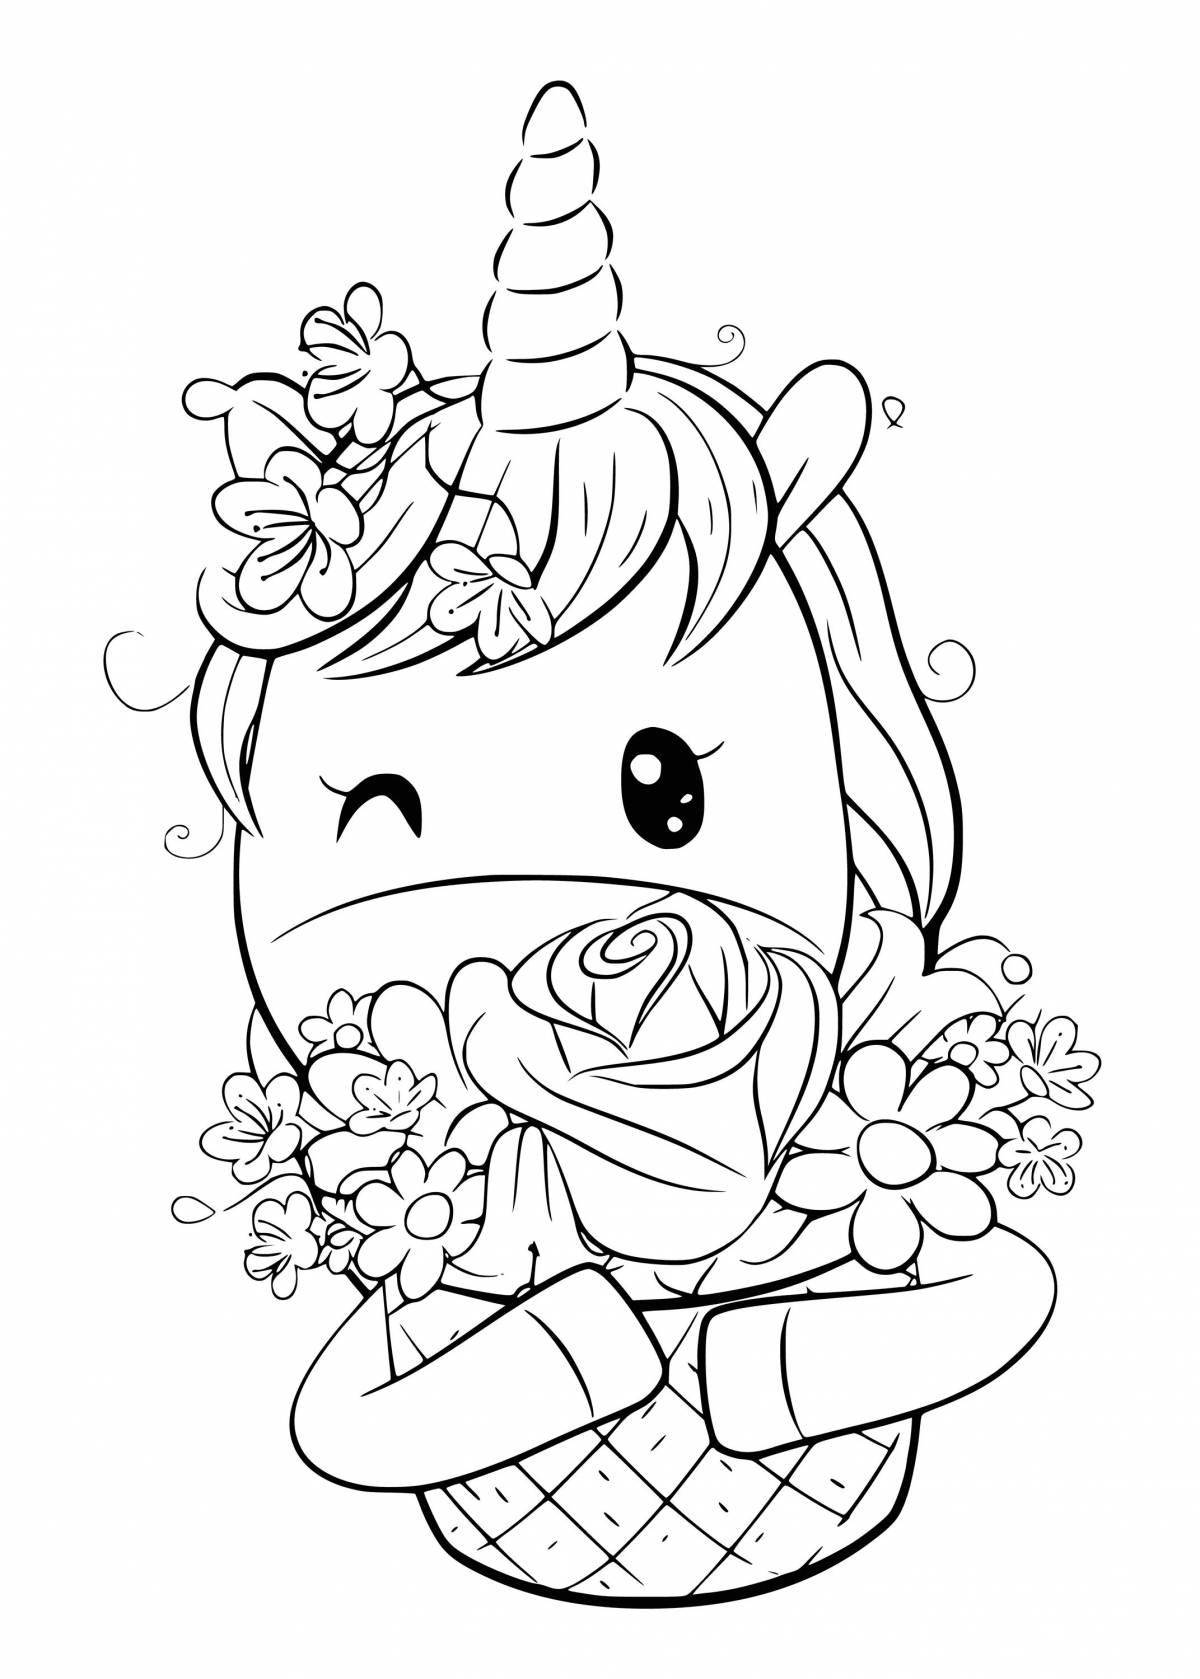 Colorific 12 years cute coloring page